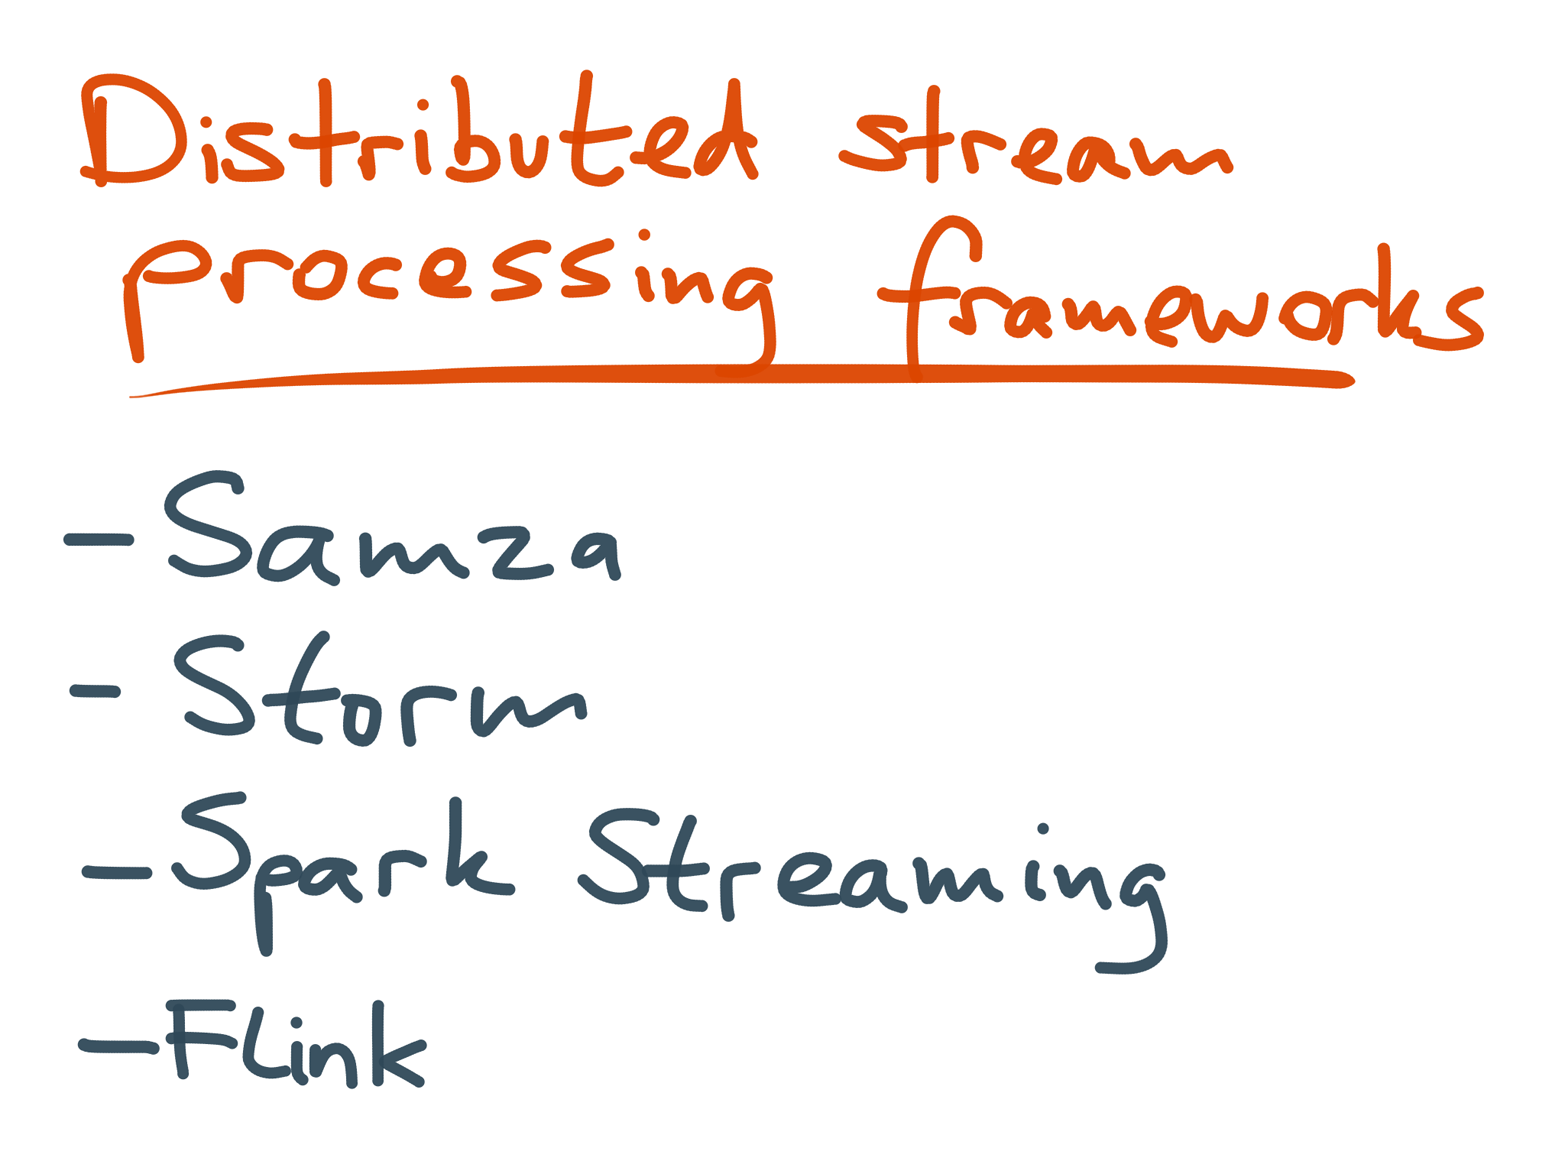 List of distributed stream processing frameworks.